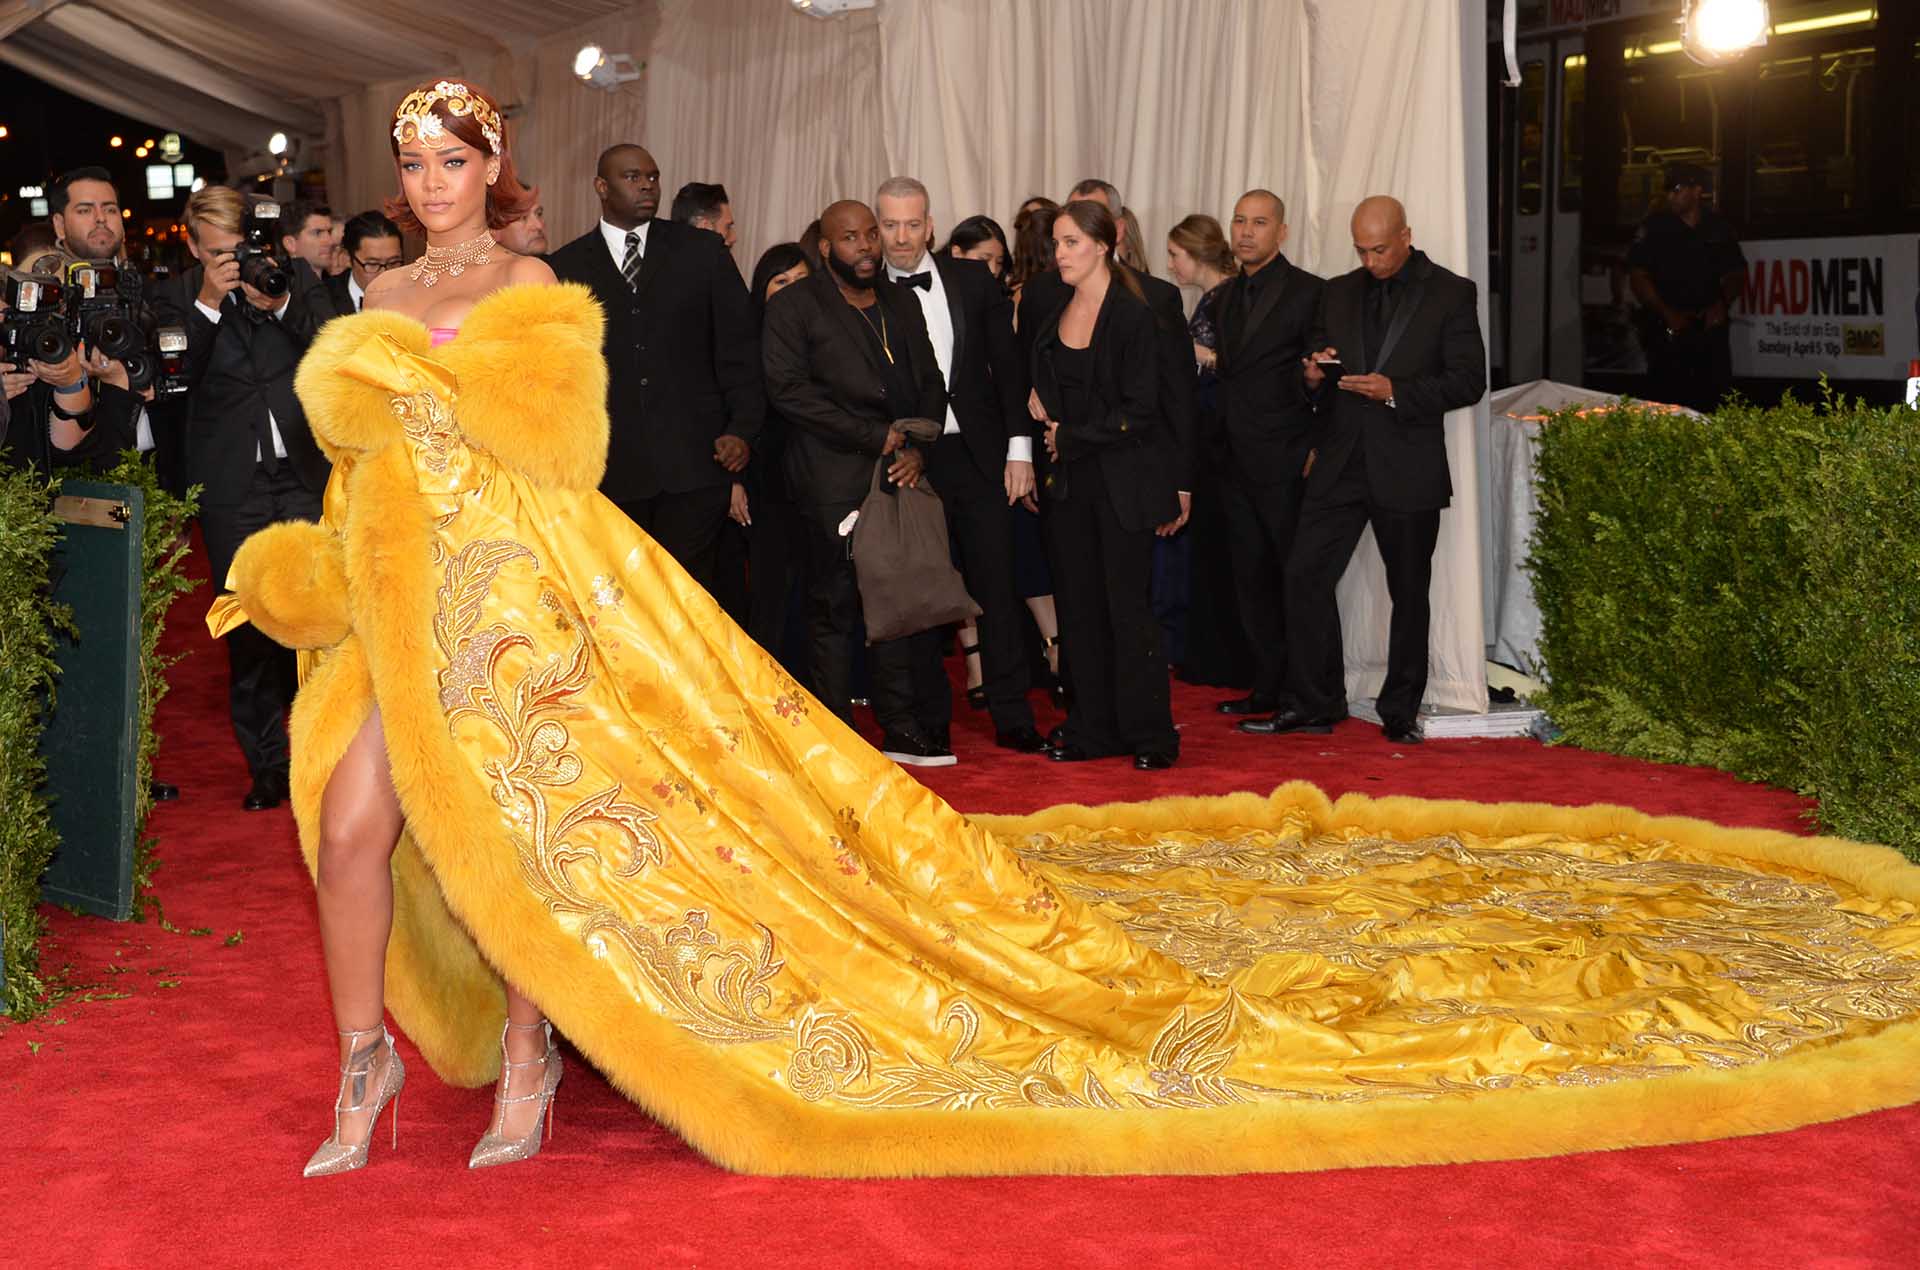 Singer Rihanna attending The Metropolitan Museum of Art's Costume Institute gala celebrating "China: Through the Looking Glass" on Monday, May 4, 2015, in New York.